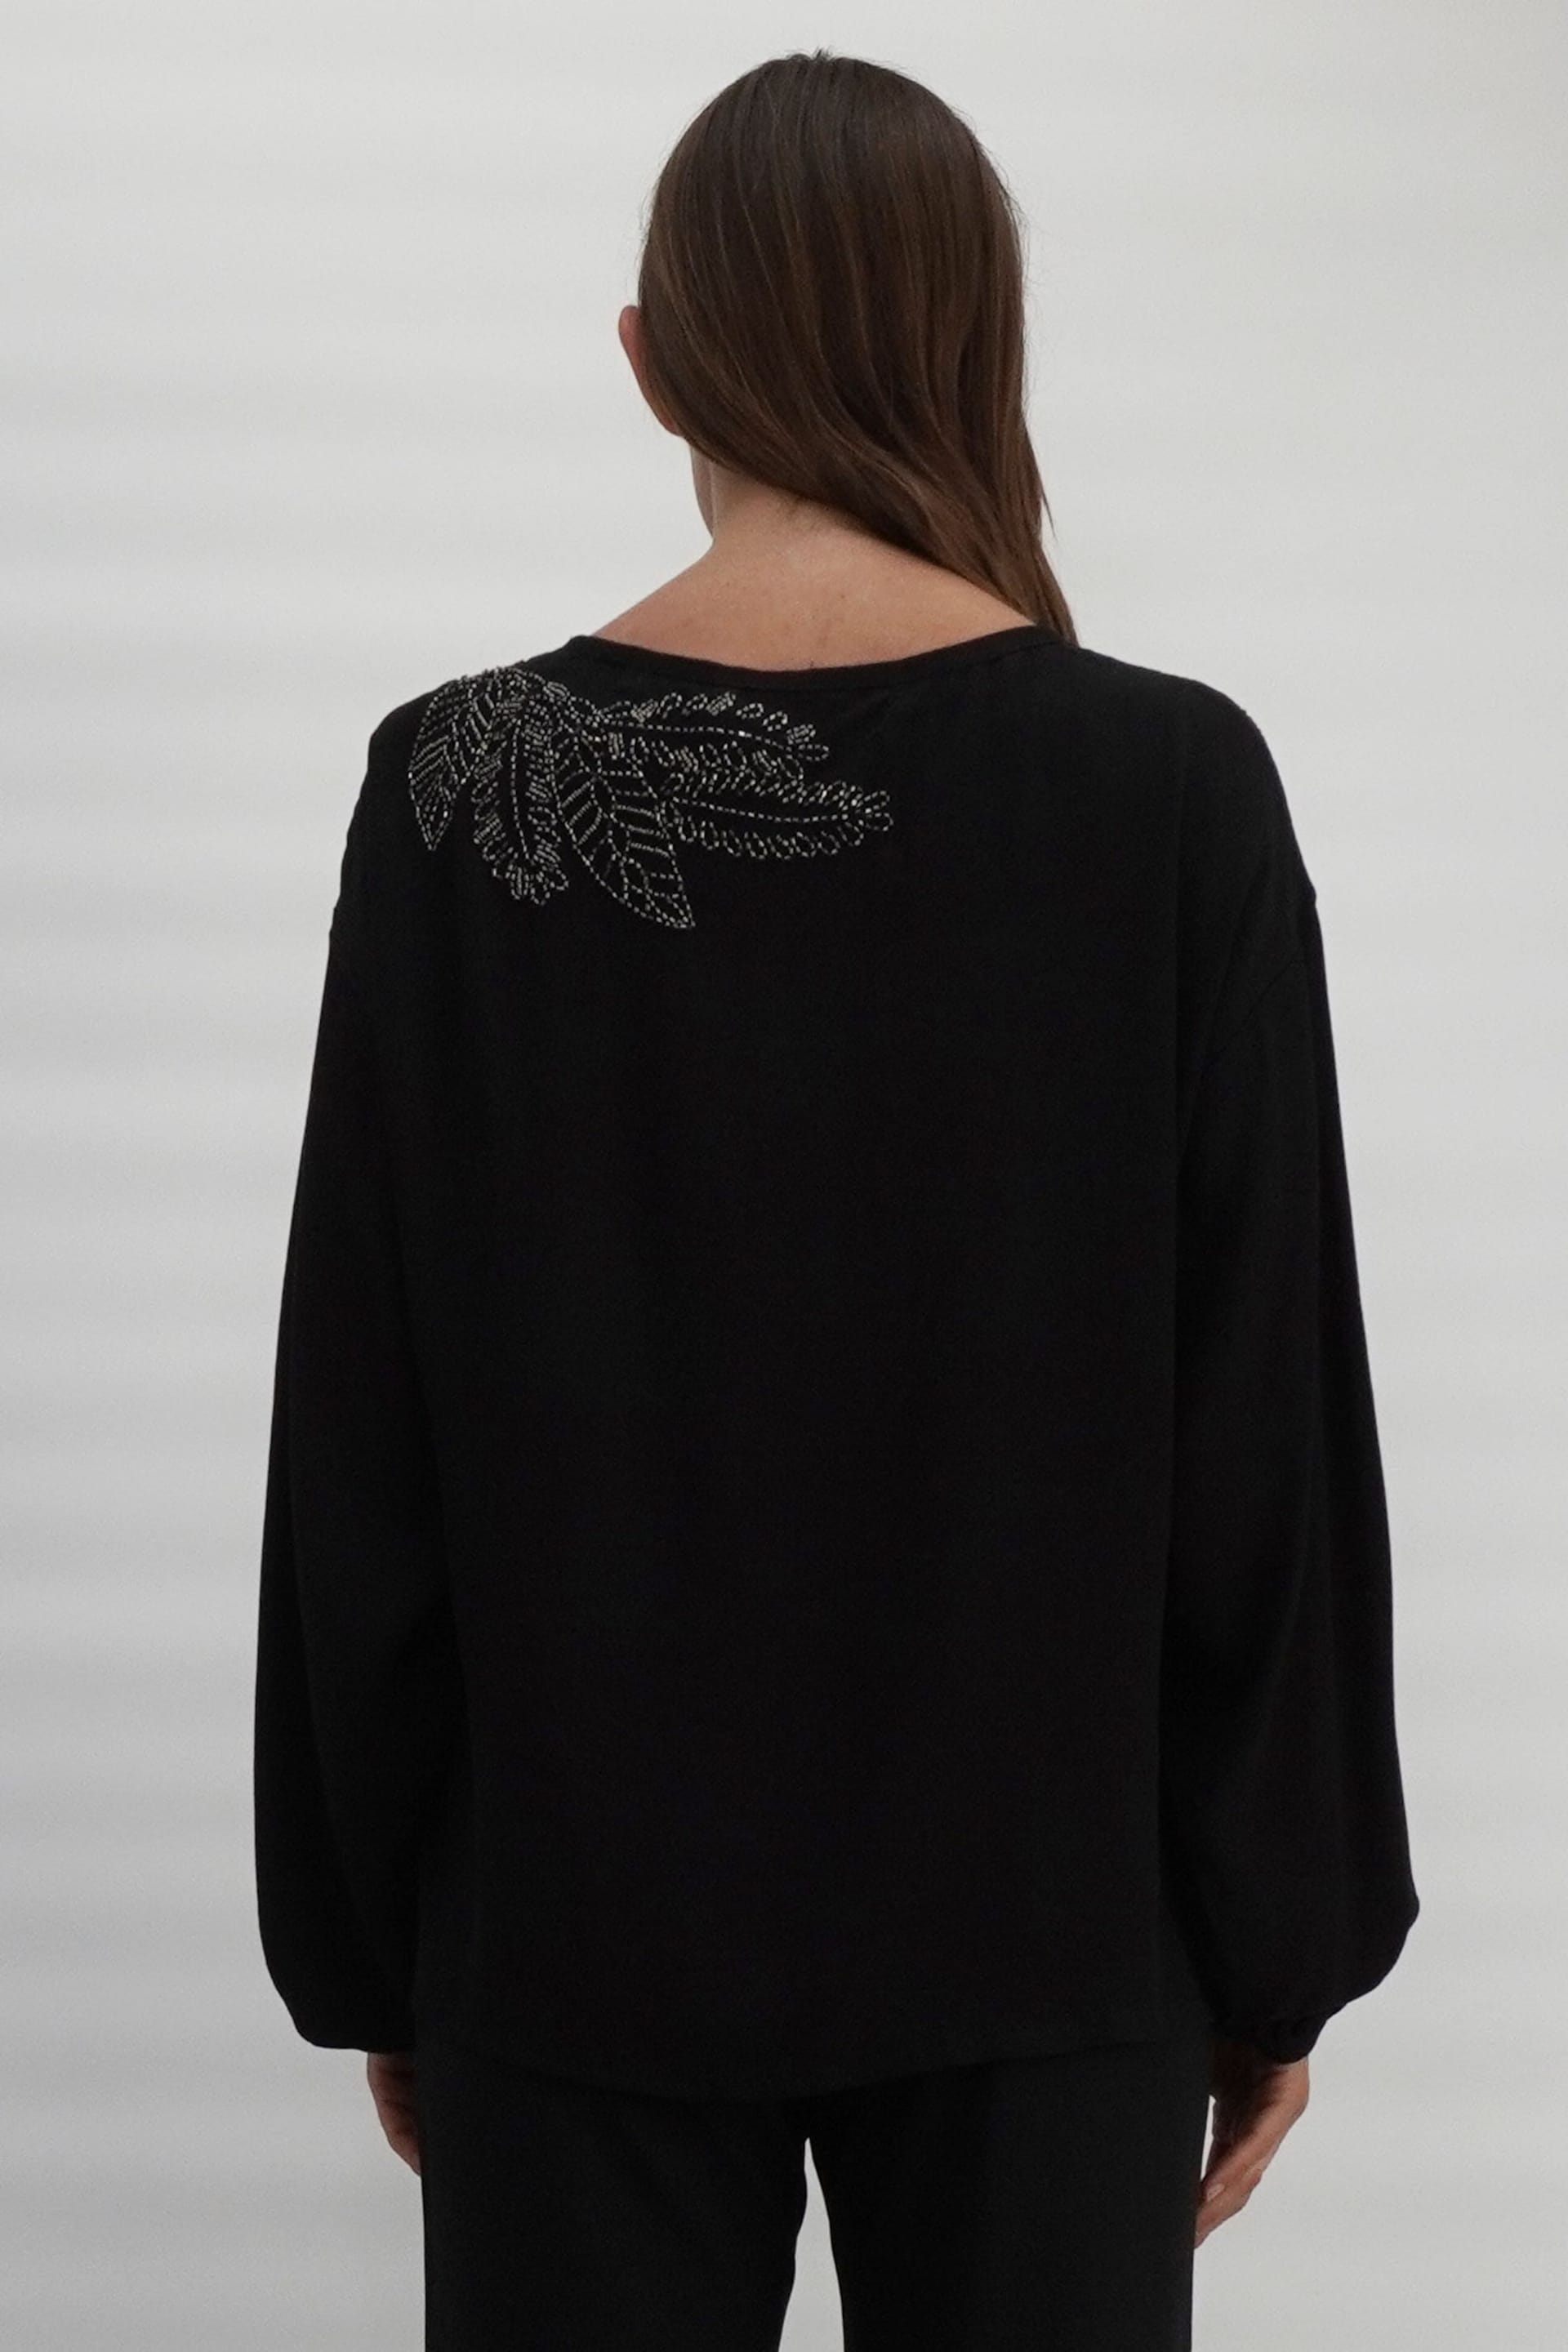 Religion Black Off The Shoulder Top With Hand-Beaded Leaf Motifs - Image 2 of 8